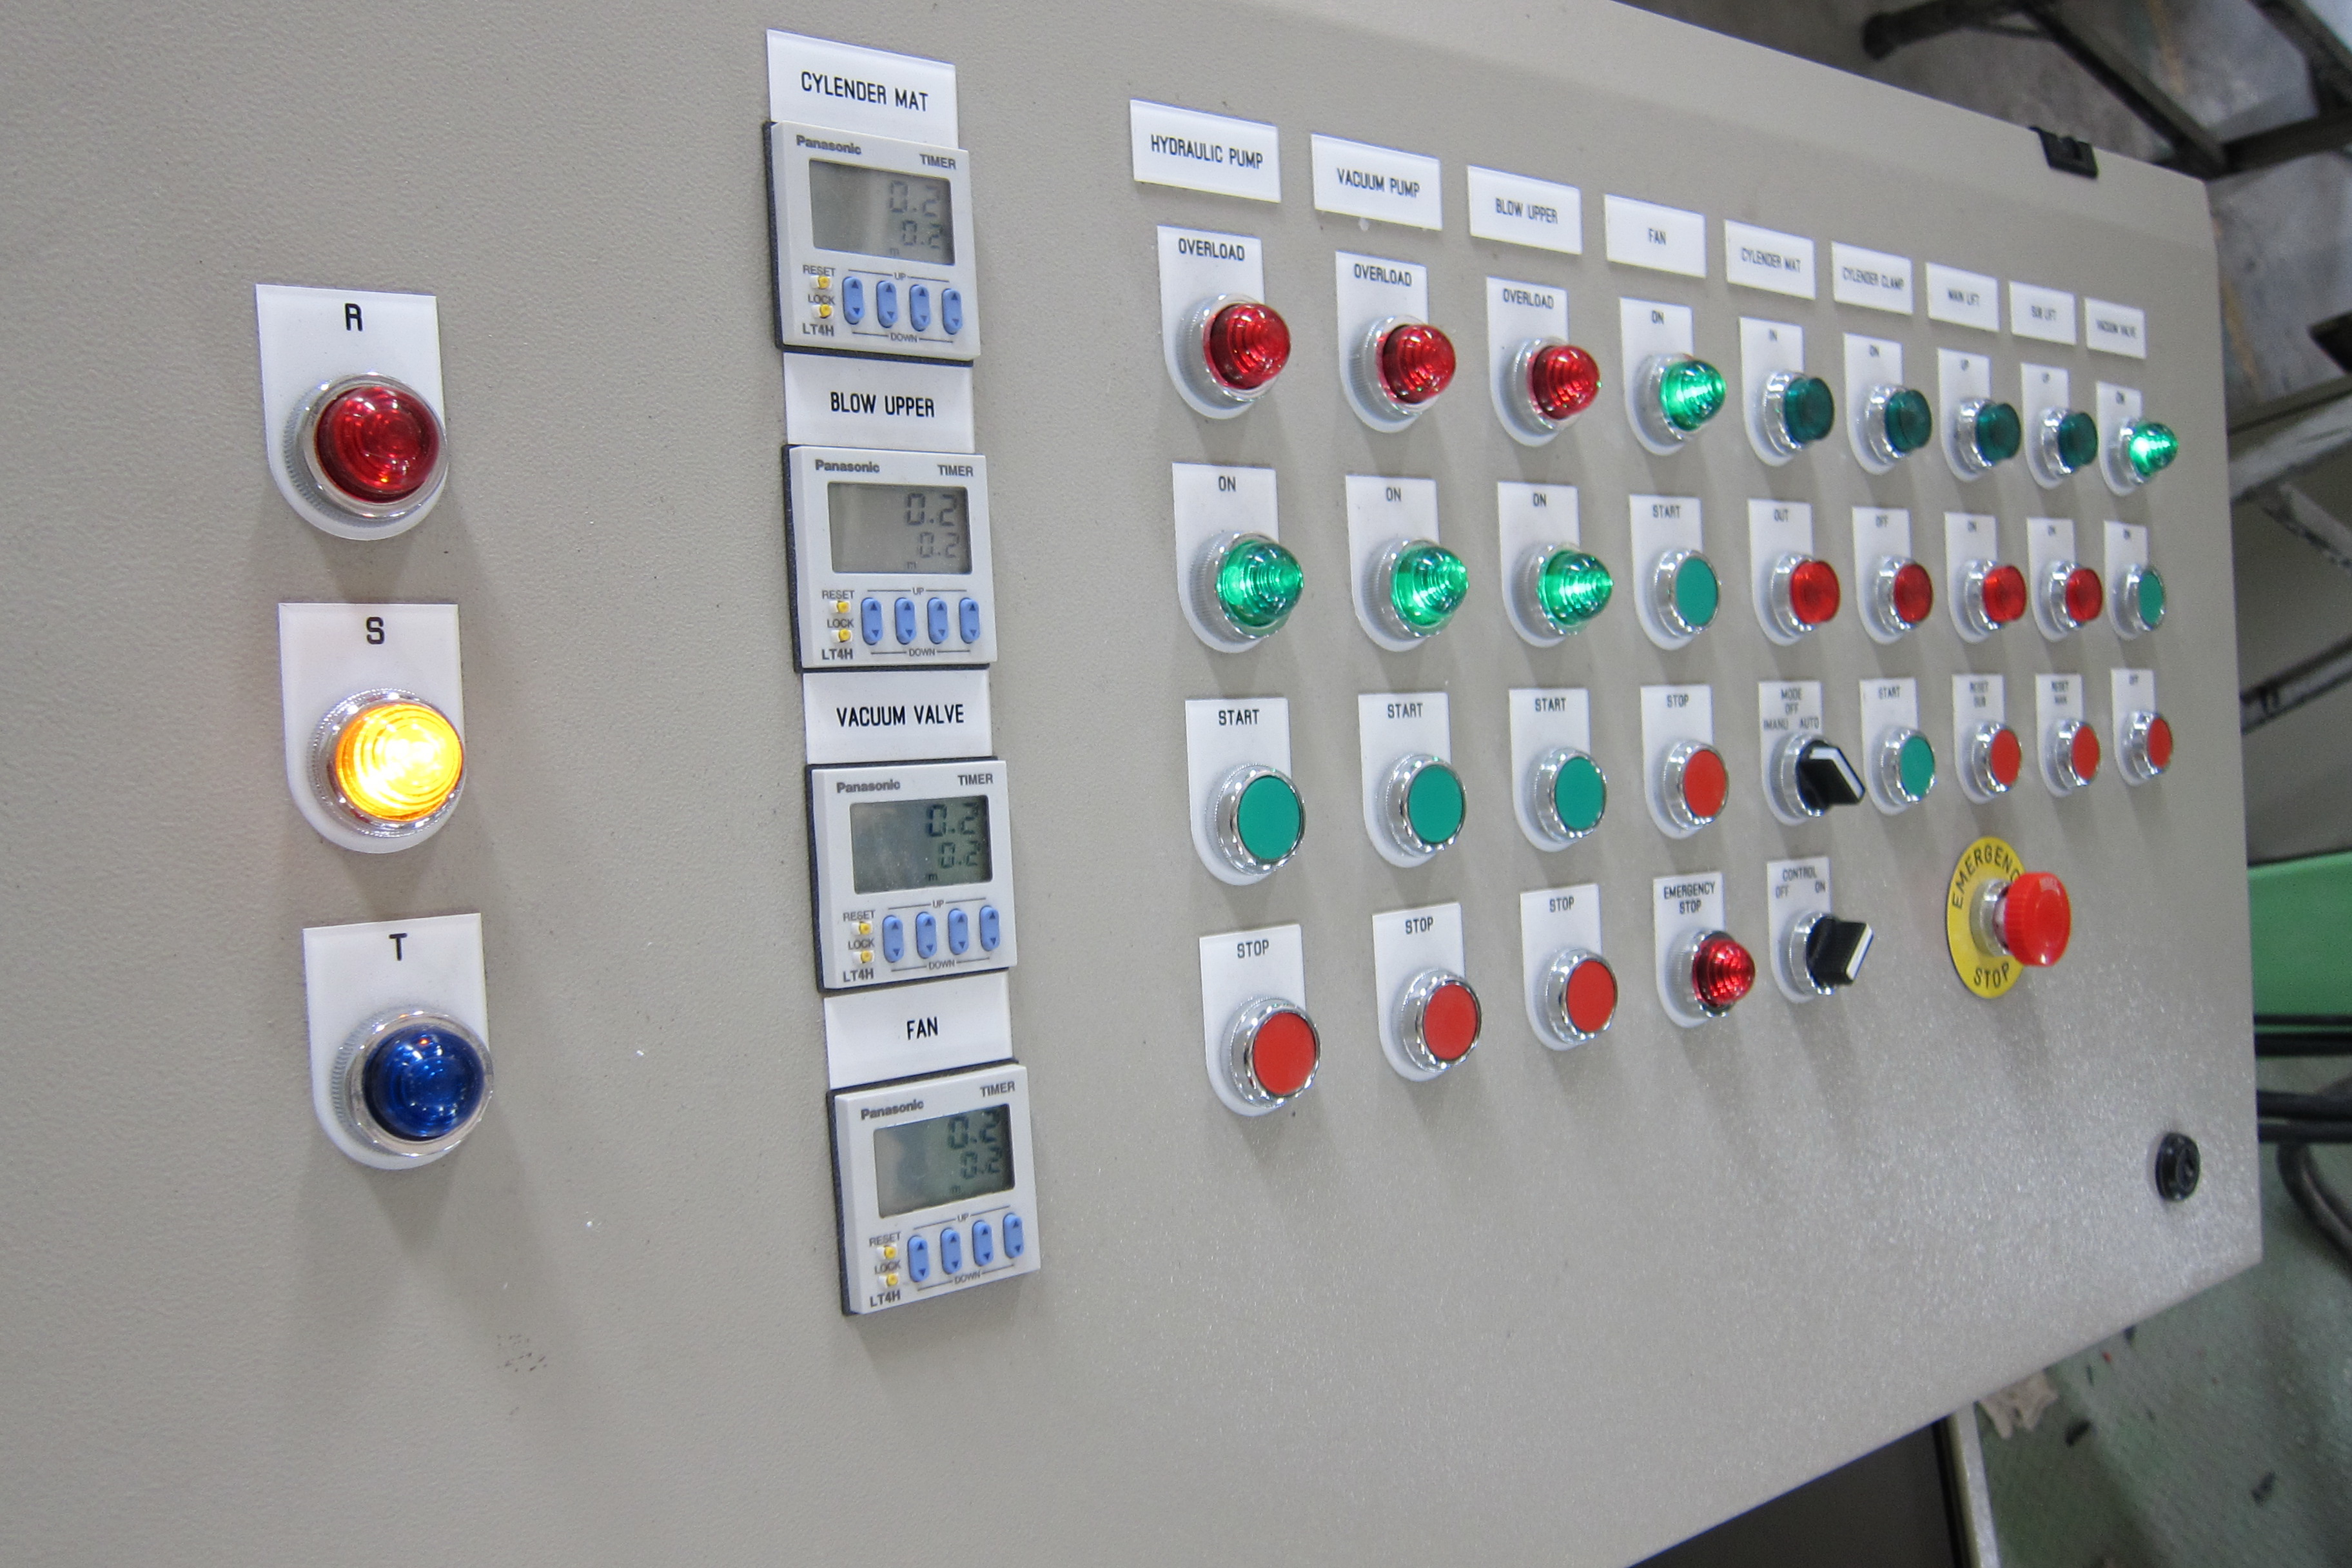 Design services, production and installation of electrical systems